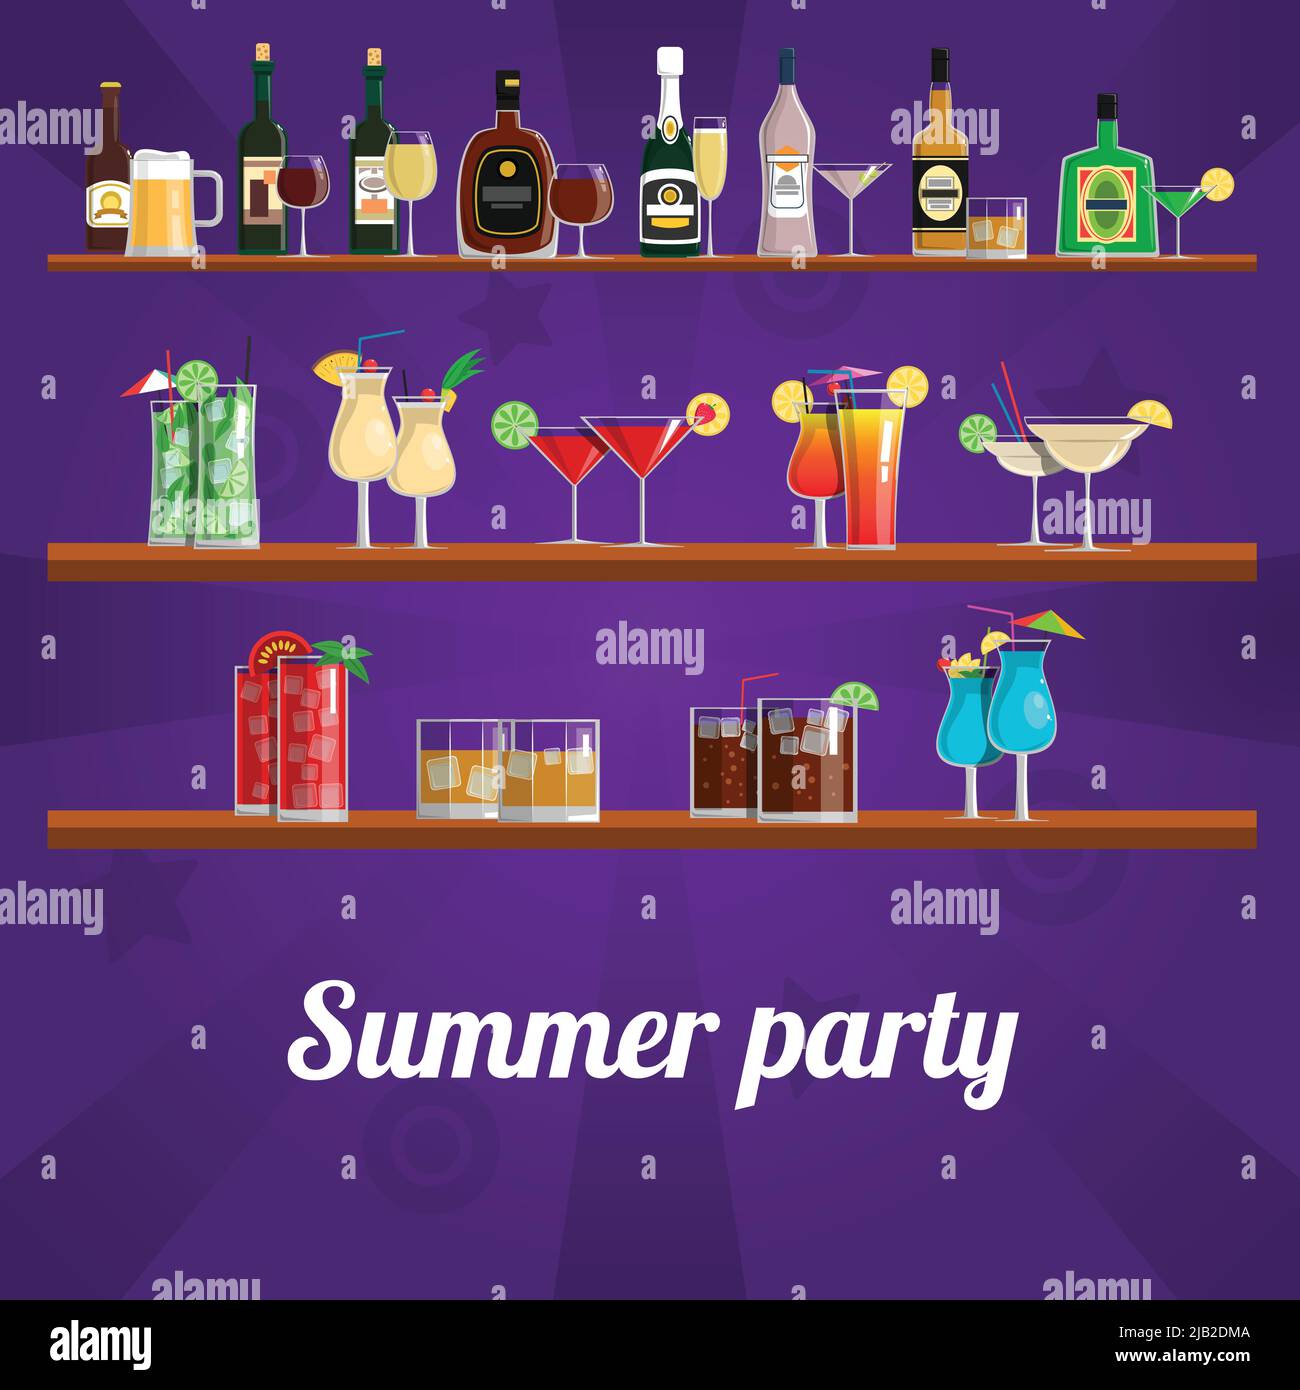 Summer cocktail party concept with drinks and refreshments on shelves vector illustration Stock Vector